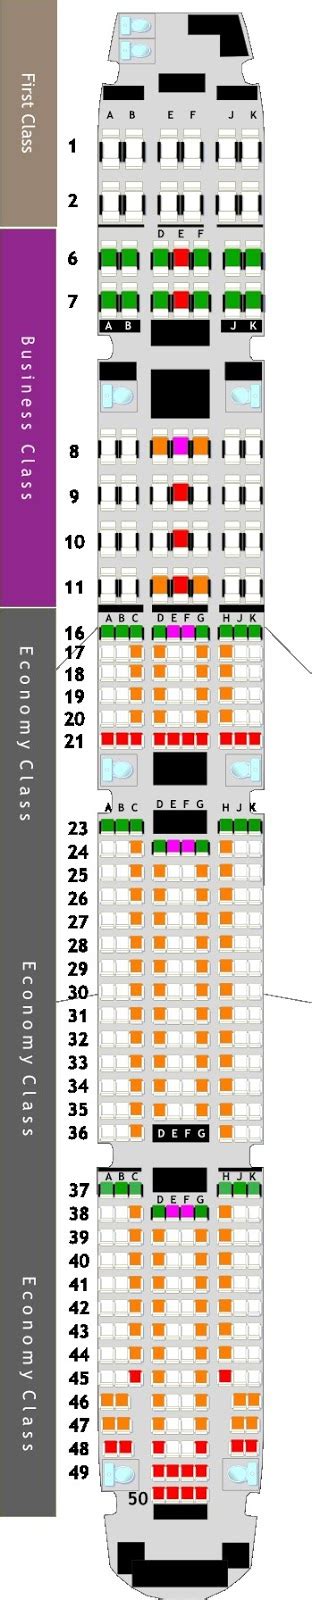 Emirates Boeing Er Seating Chart Hot Sex Picture